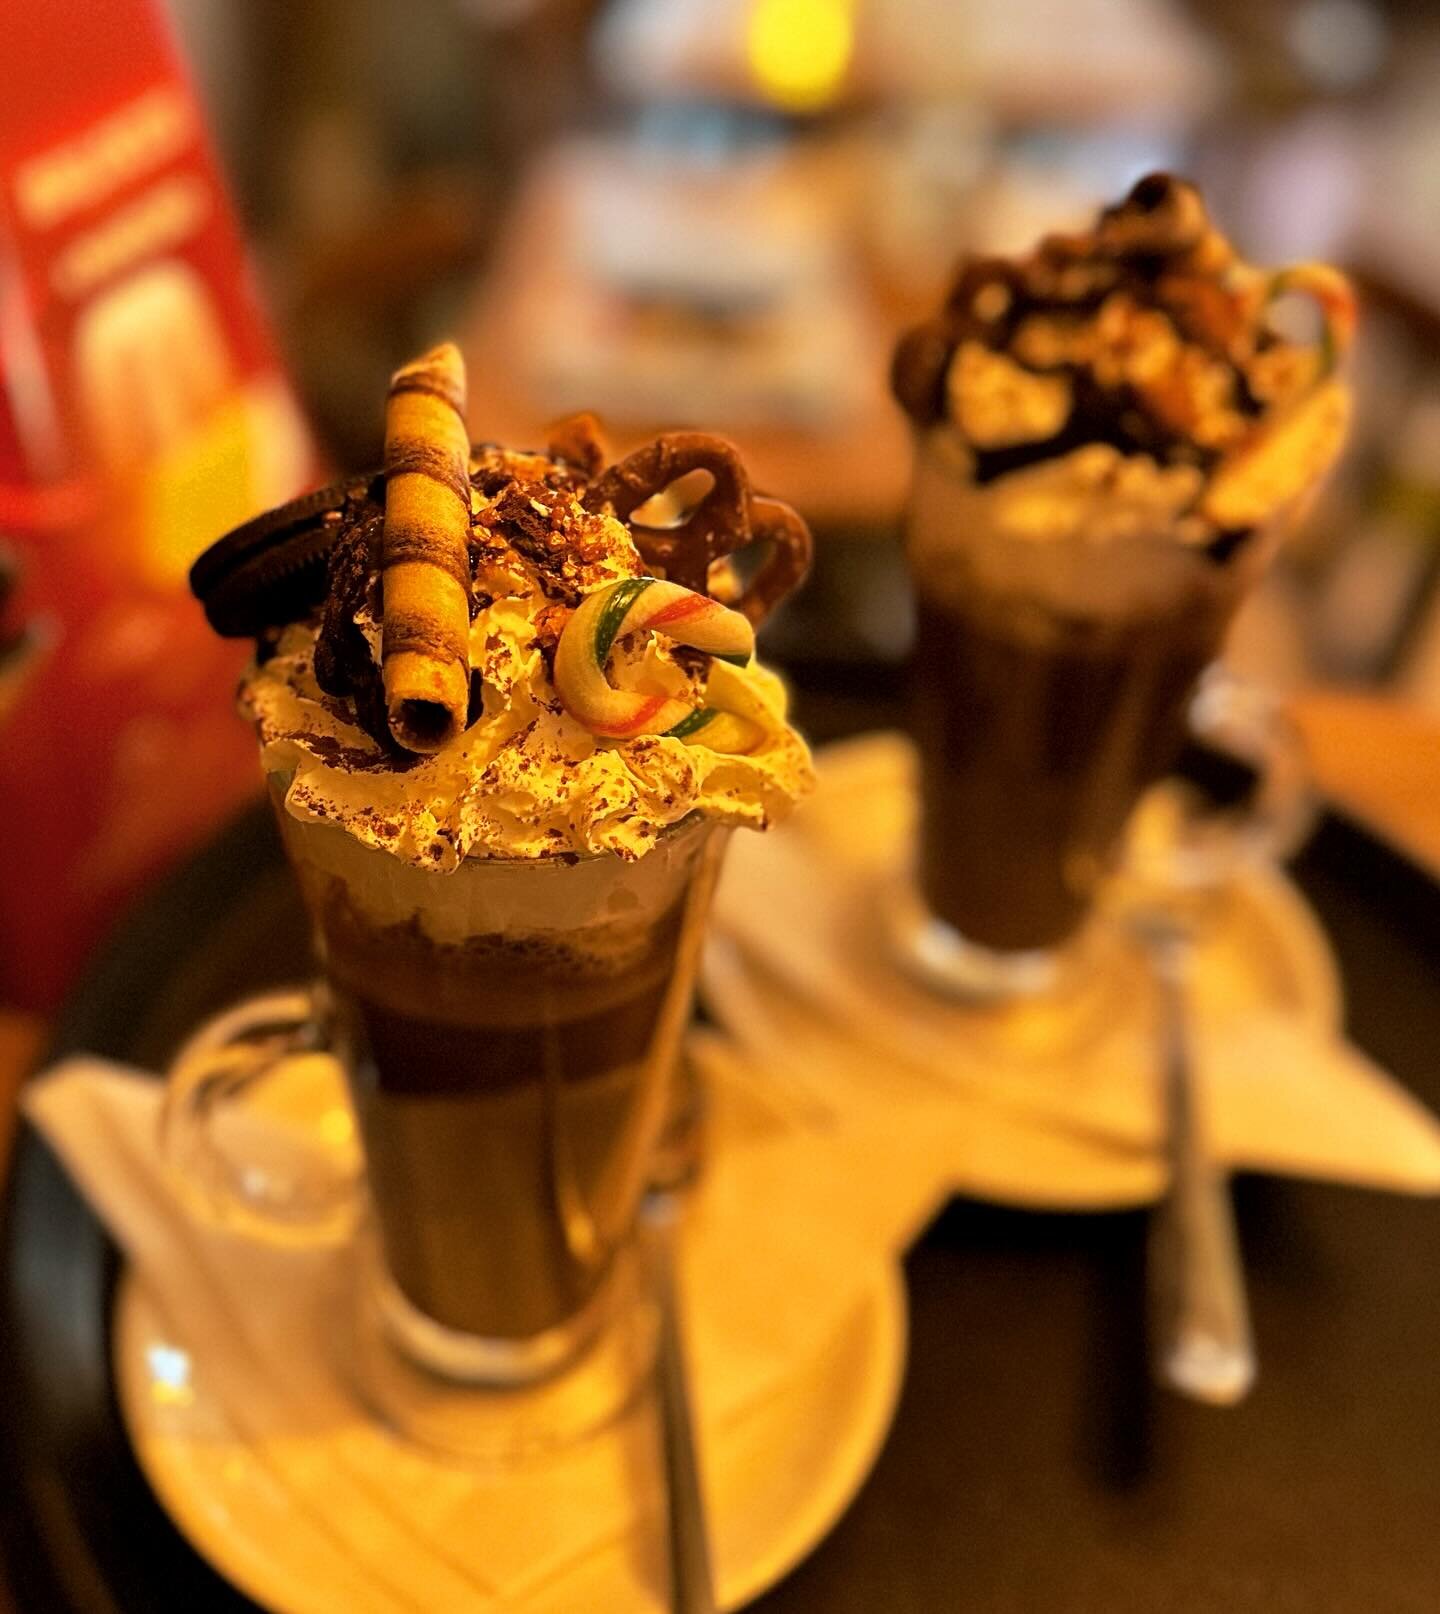 Have you had the pleasure of trying one of our hot chocolates, crowned with candy canes, biscuits, marshmallows, cream, wafer rolls and&hellip; come in to found out and indulge yourself! 🥰😳🤤✨🍫☕️🍭

#restaurant #cafe #brighton #brightonrestaurant 